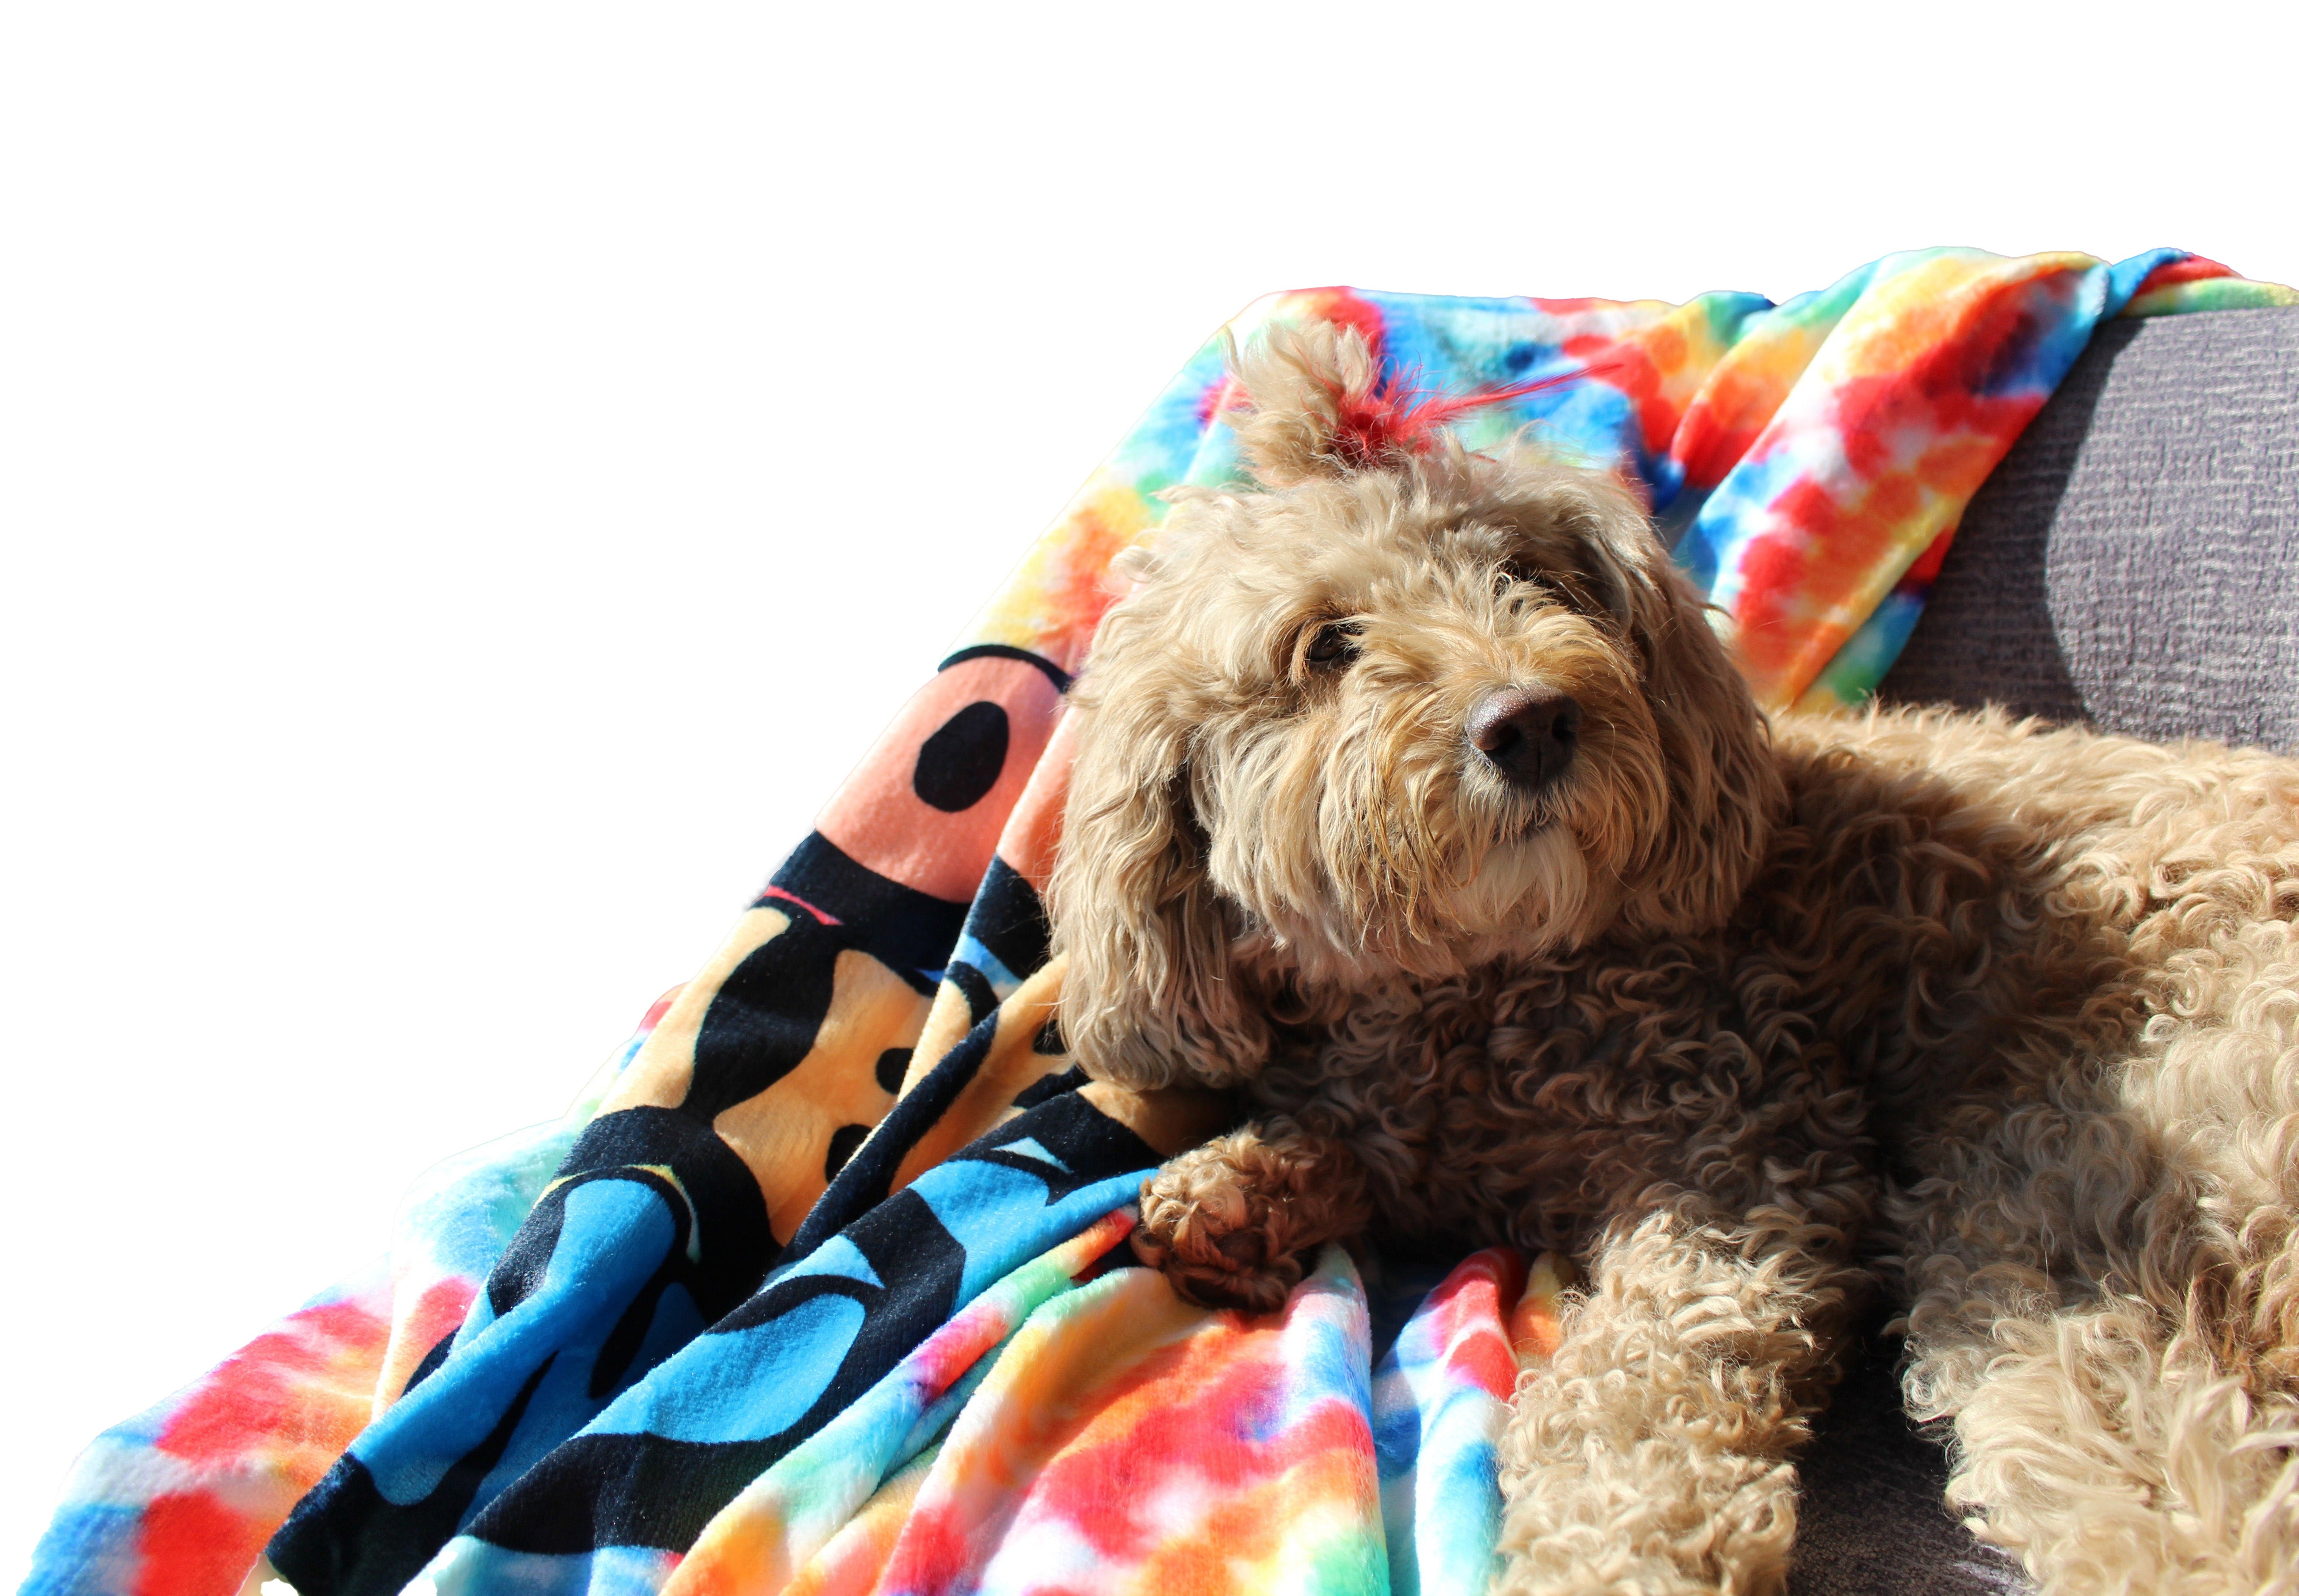 Good Vibes Only blanket laid out on chair with cute Goldendoodle dog on it